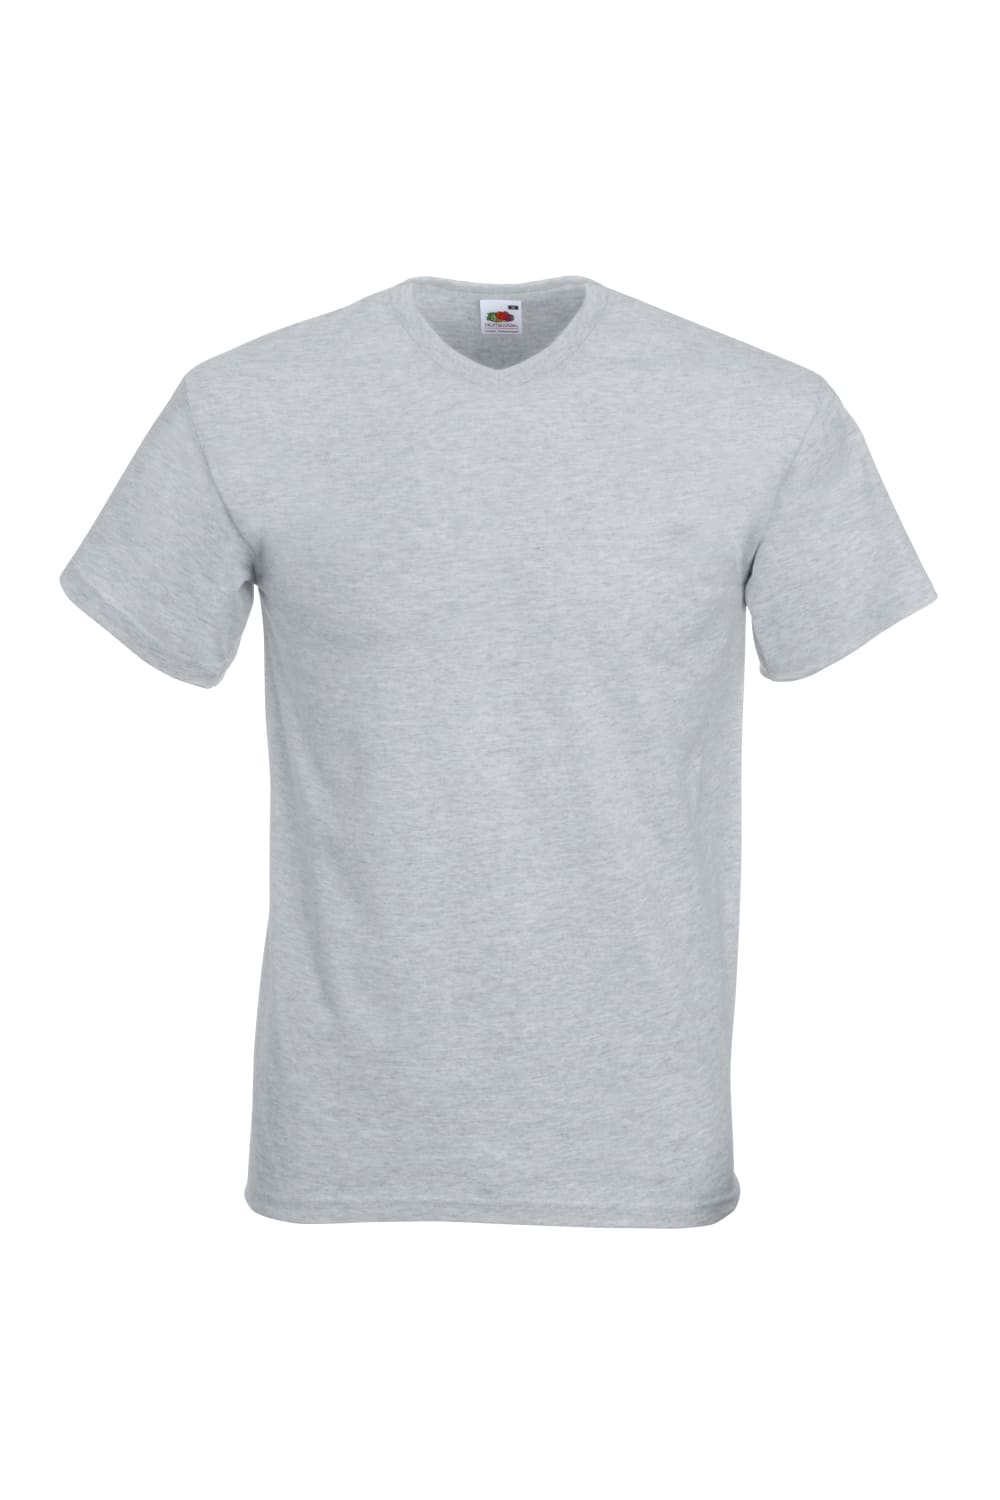 Fruit Of The Loom Mens Valueweight V-Neck T-Short Sleeve T-Shirt (Heather Gray)